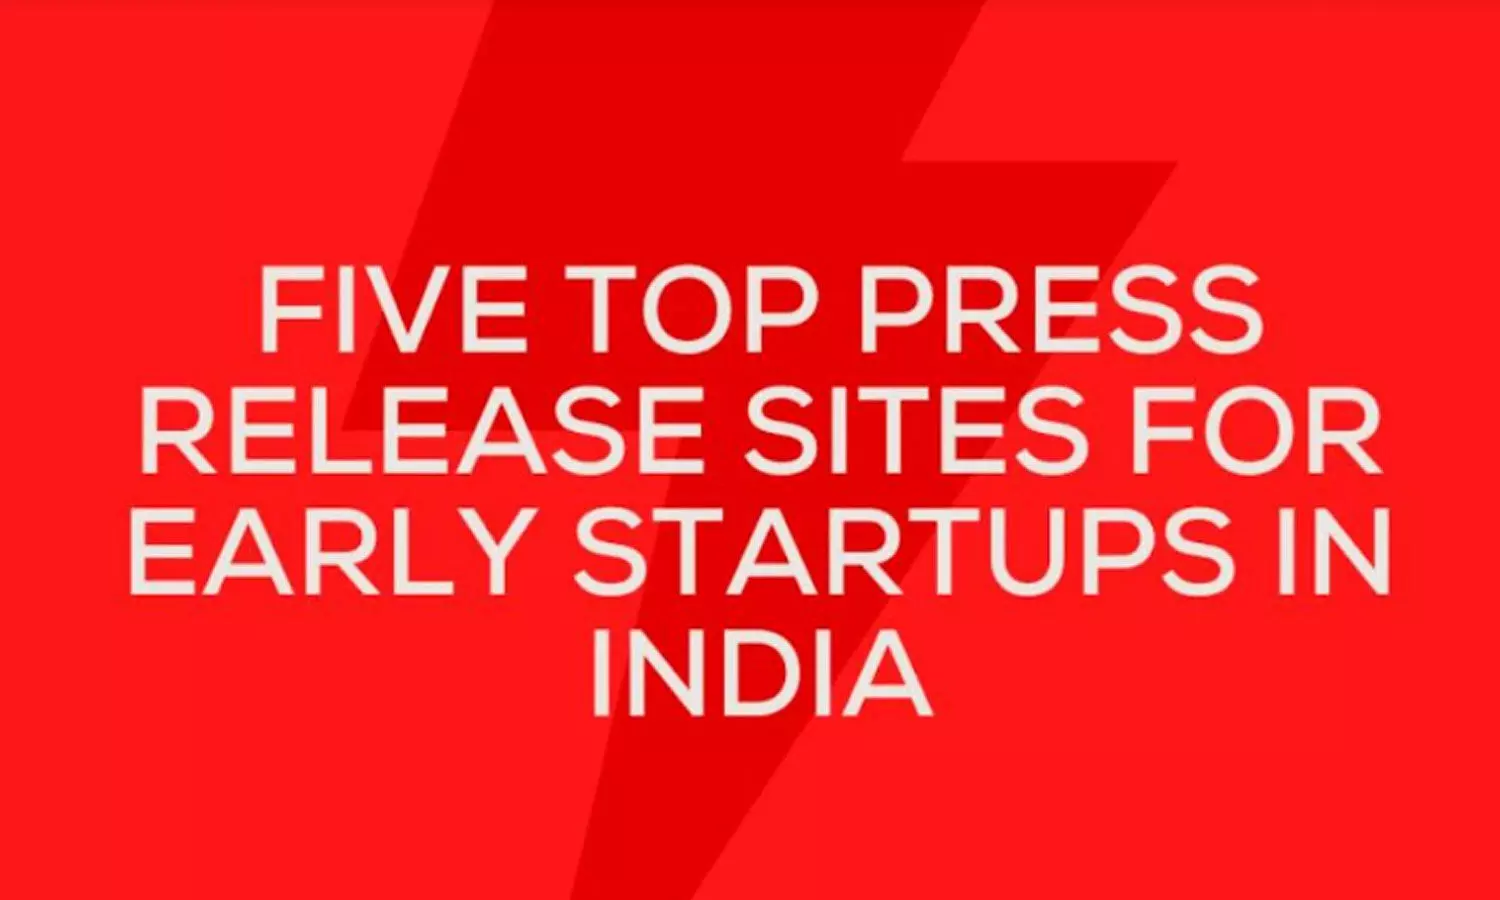 Five Top Press Release Sites for Early Startups in India